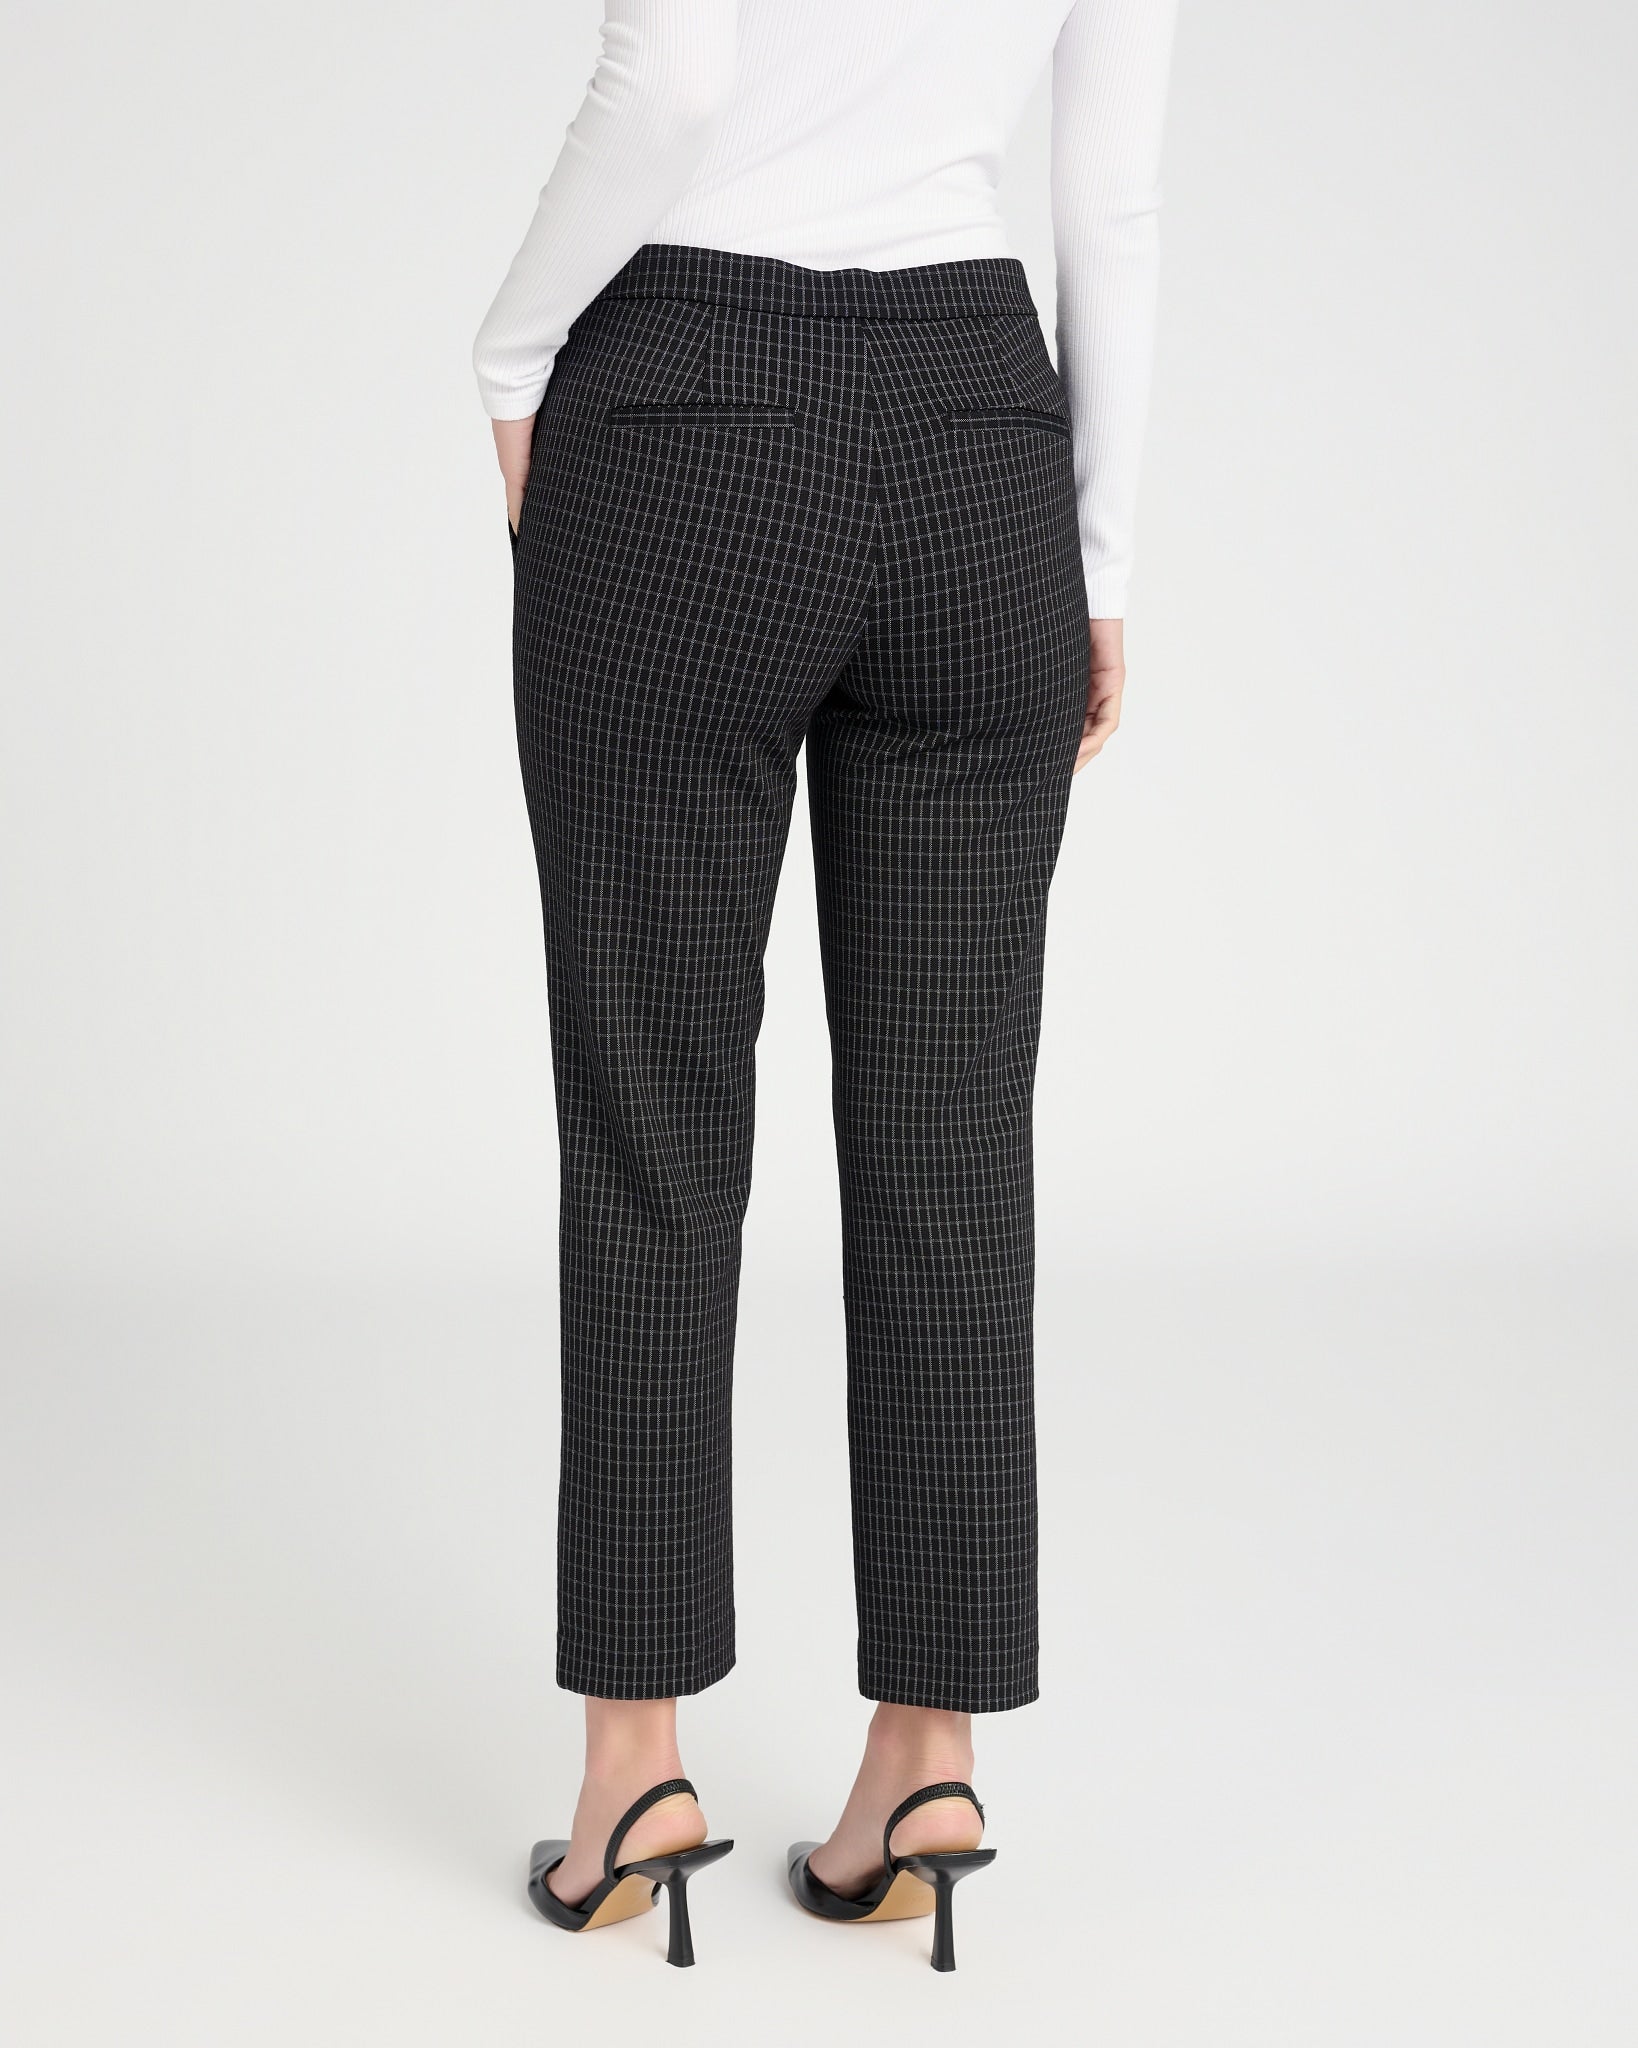 Smooth Fit Pull-On High-Rise Pant | Trousers | Lululemon EU